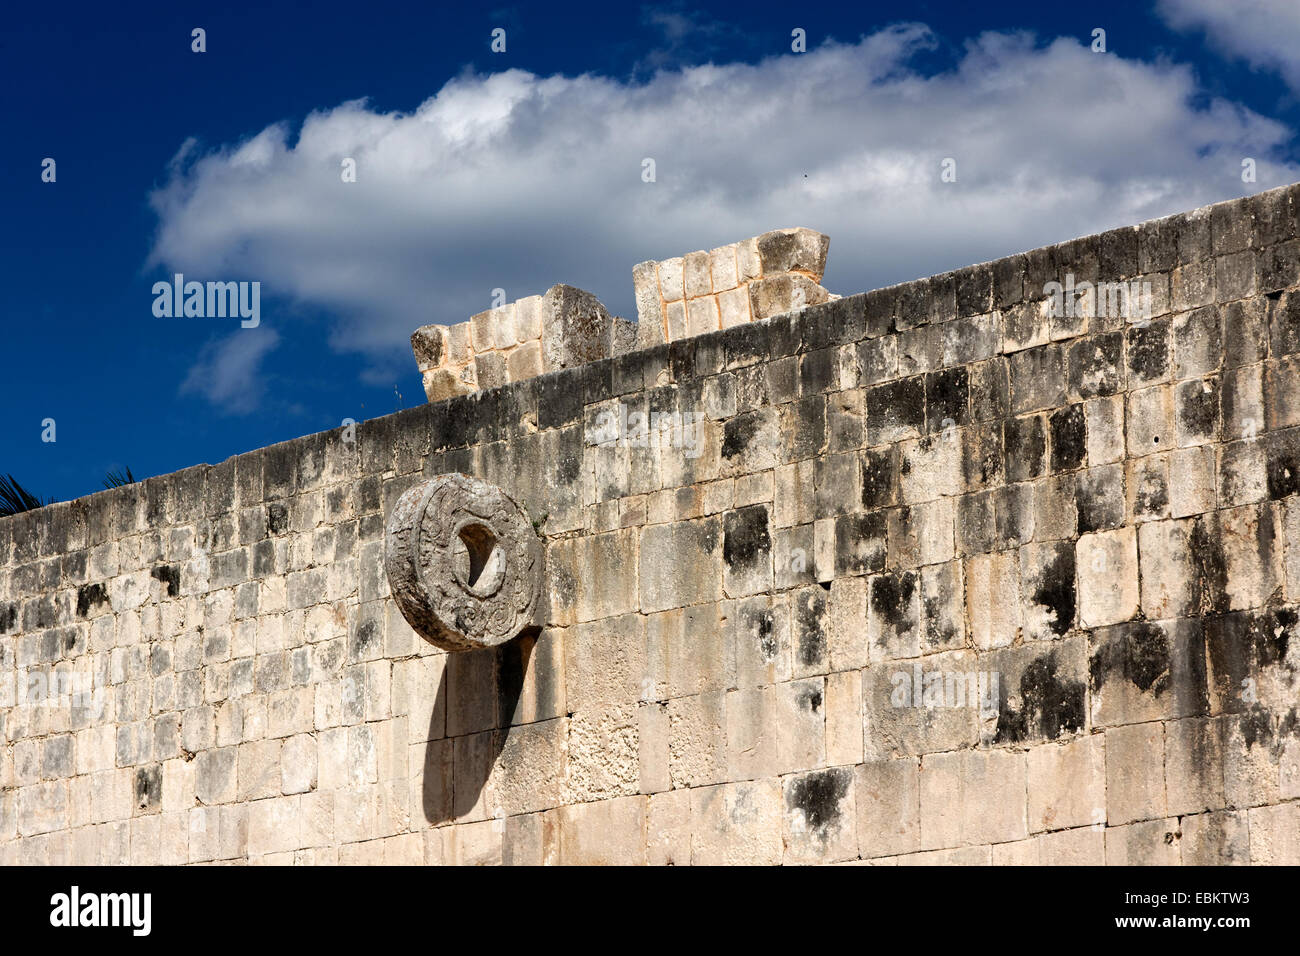 Detail of a hoop at the Juego de Pelota (ball game) ruins at the Mayan city of Chichen Itza, Mexico. Stock Photo